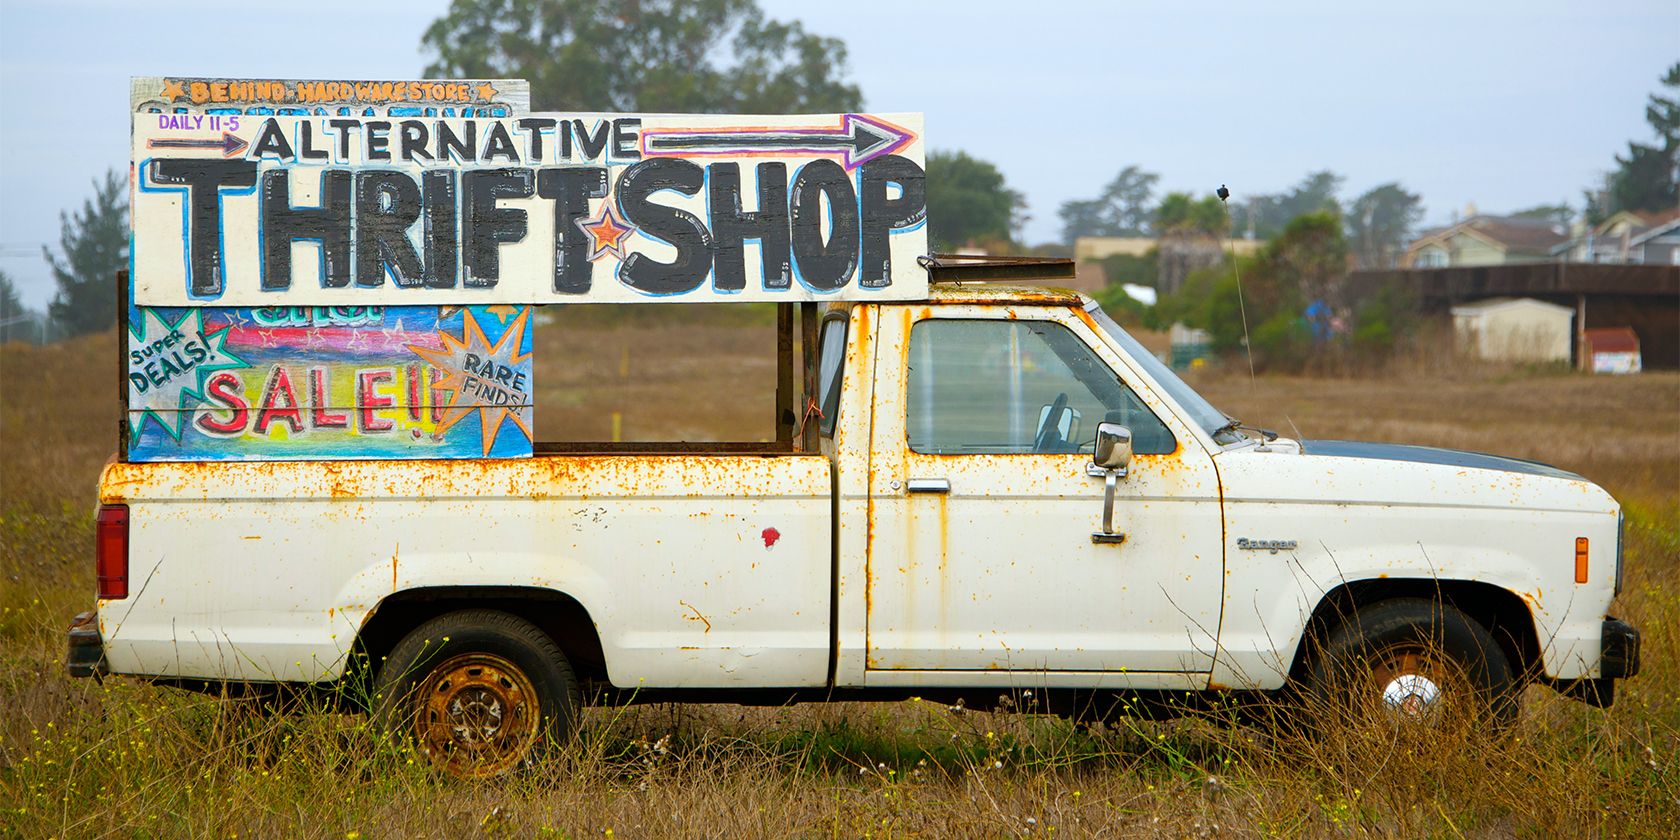 thrift shop sign on an old white truck